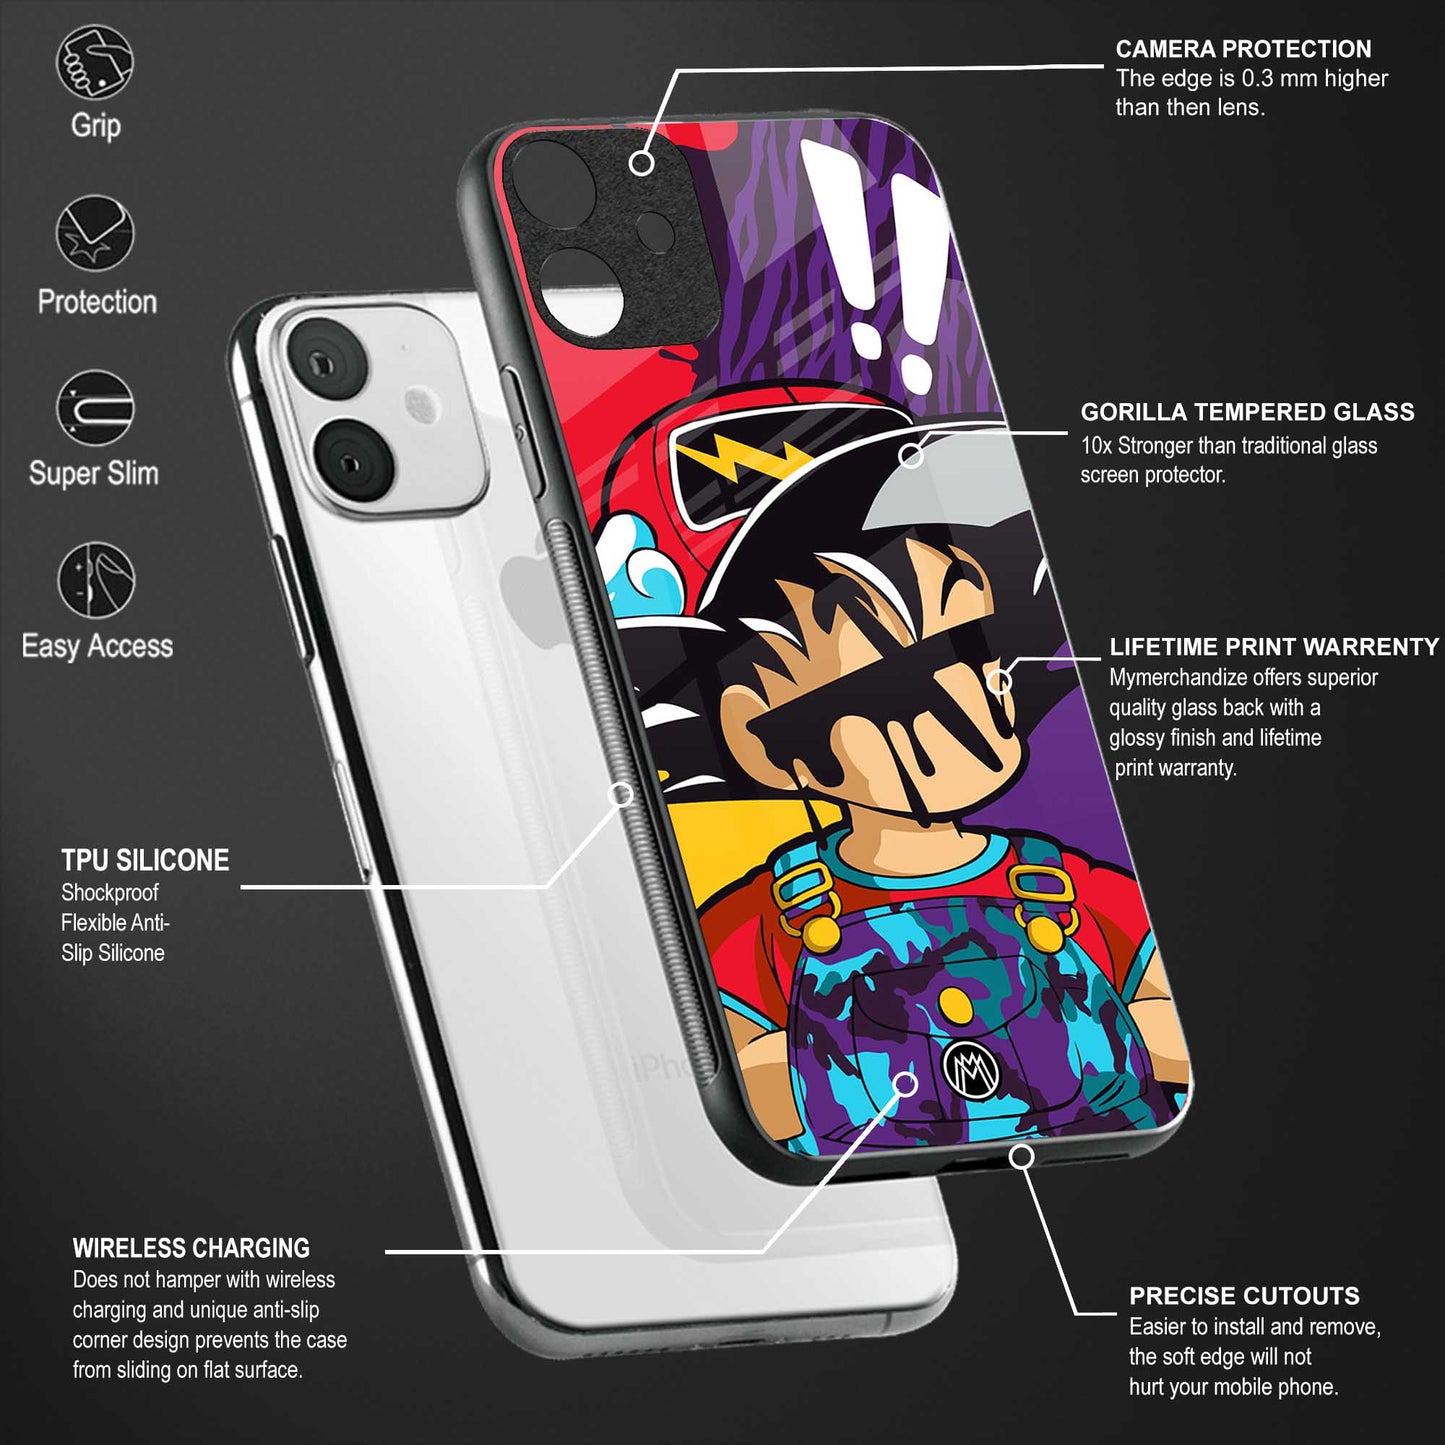 dragon ball z art phone cover for iphone x